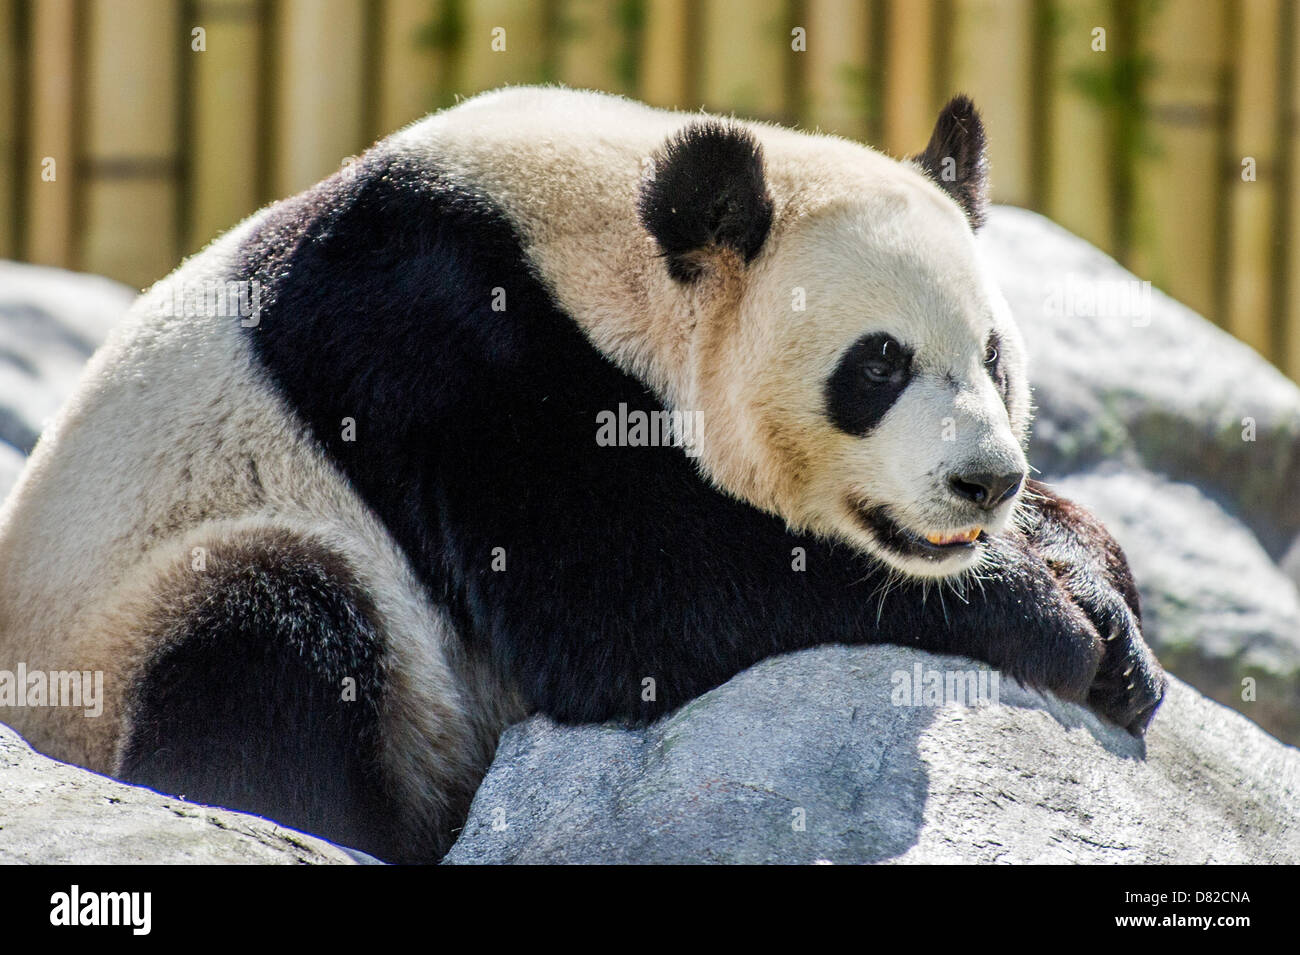 Toronto, Ontario, Canada. 17th May 2013. ER SHUN (male: meaning double ...